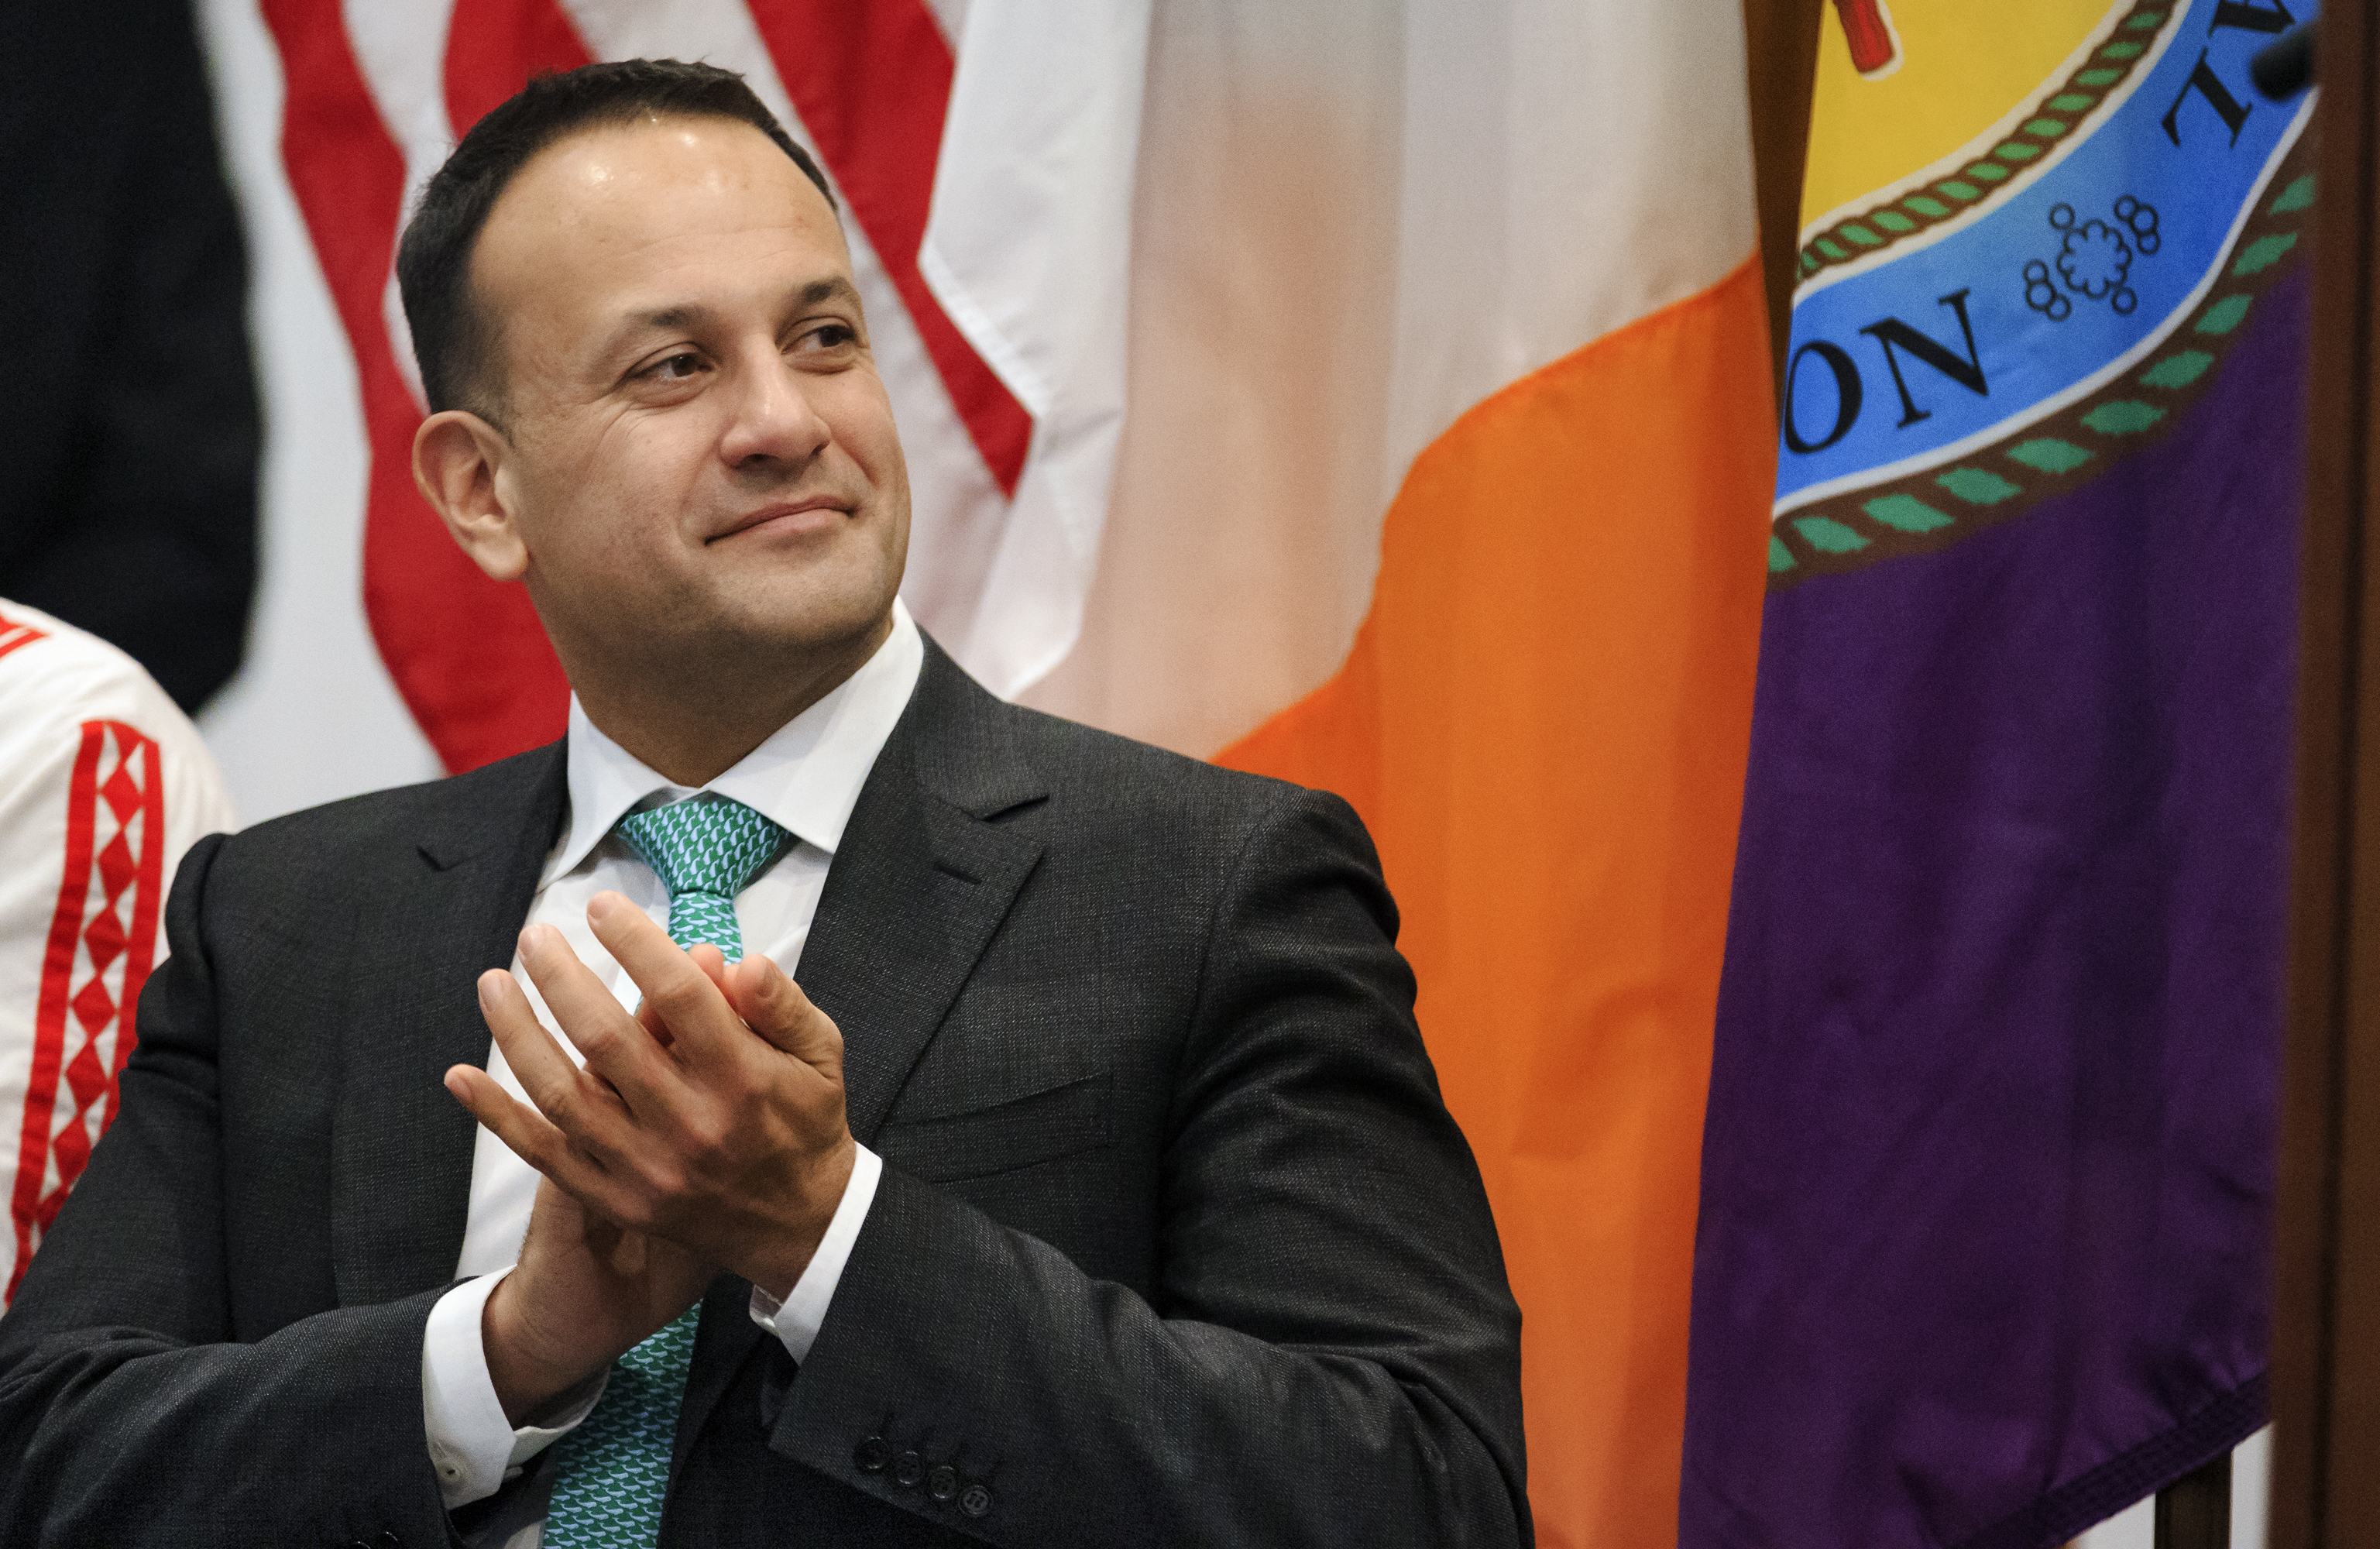 Ireland Prime Minister Leo Varadkar claps as he watches members of the Choctaw Tribe dance during his visit to the Choctaw Nation in Durant, Okla. on March 12, 2018. (Chris Landsberger—The Oklahoman/AP)